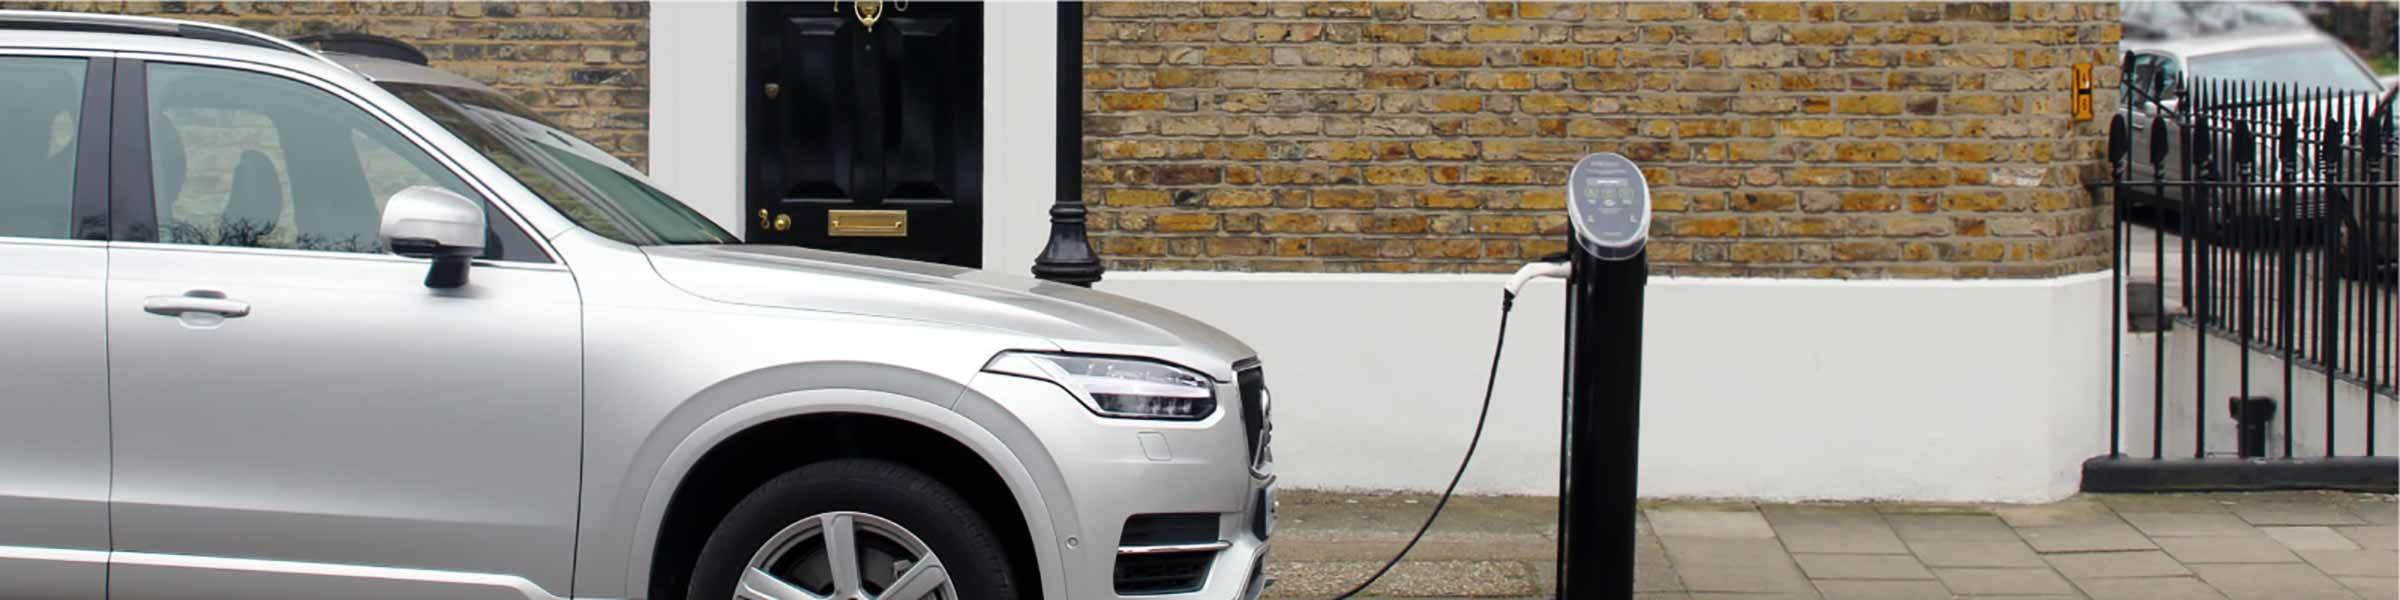 How to Charge Your Electric Car With No Driveway